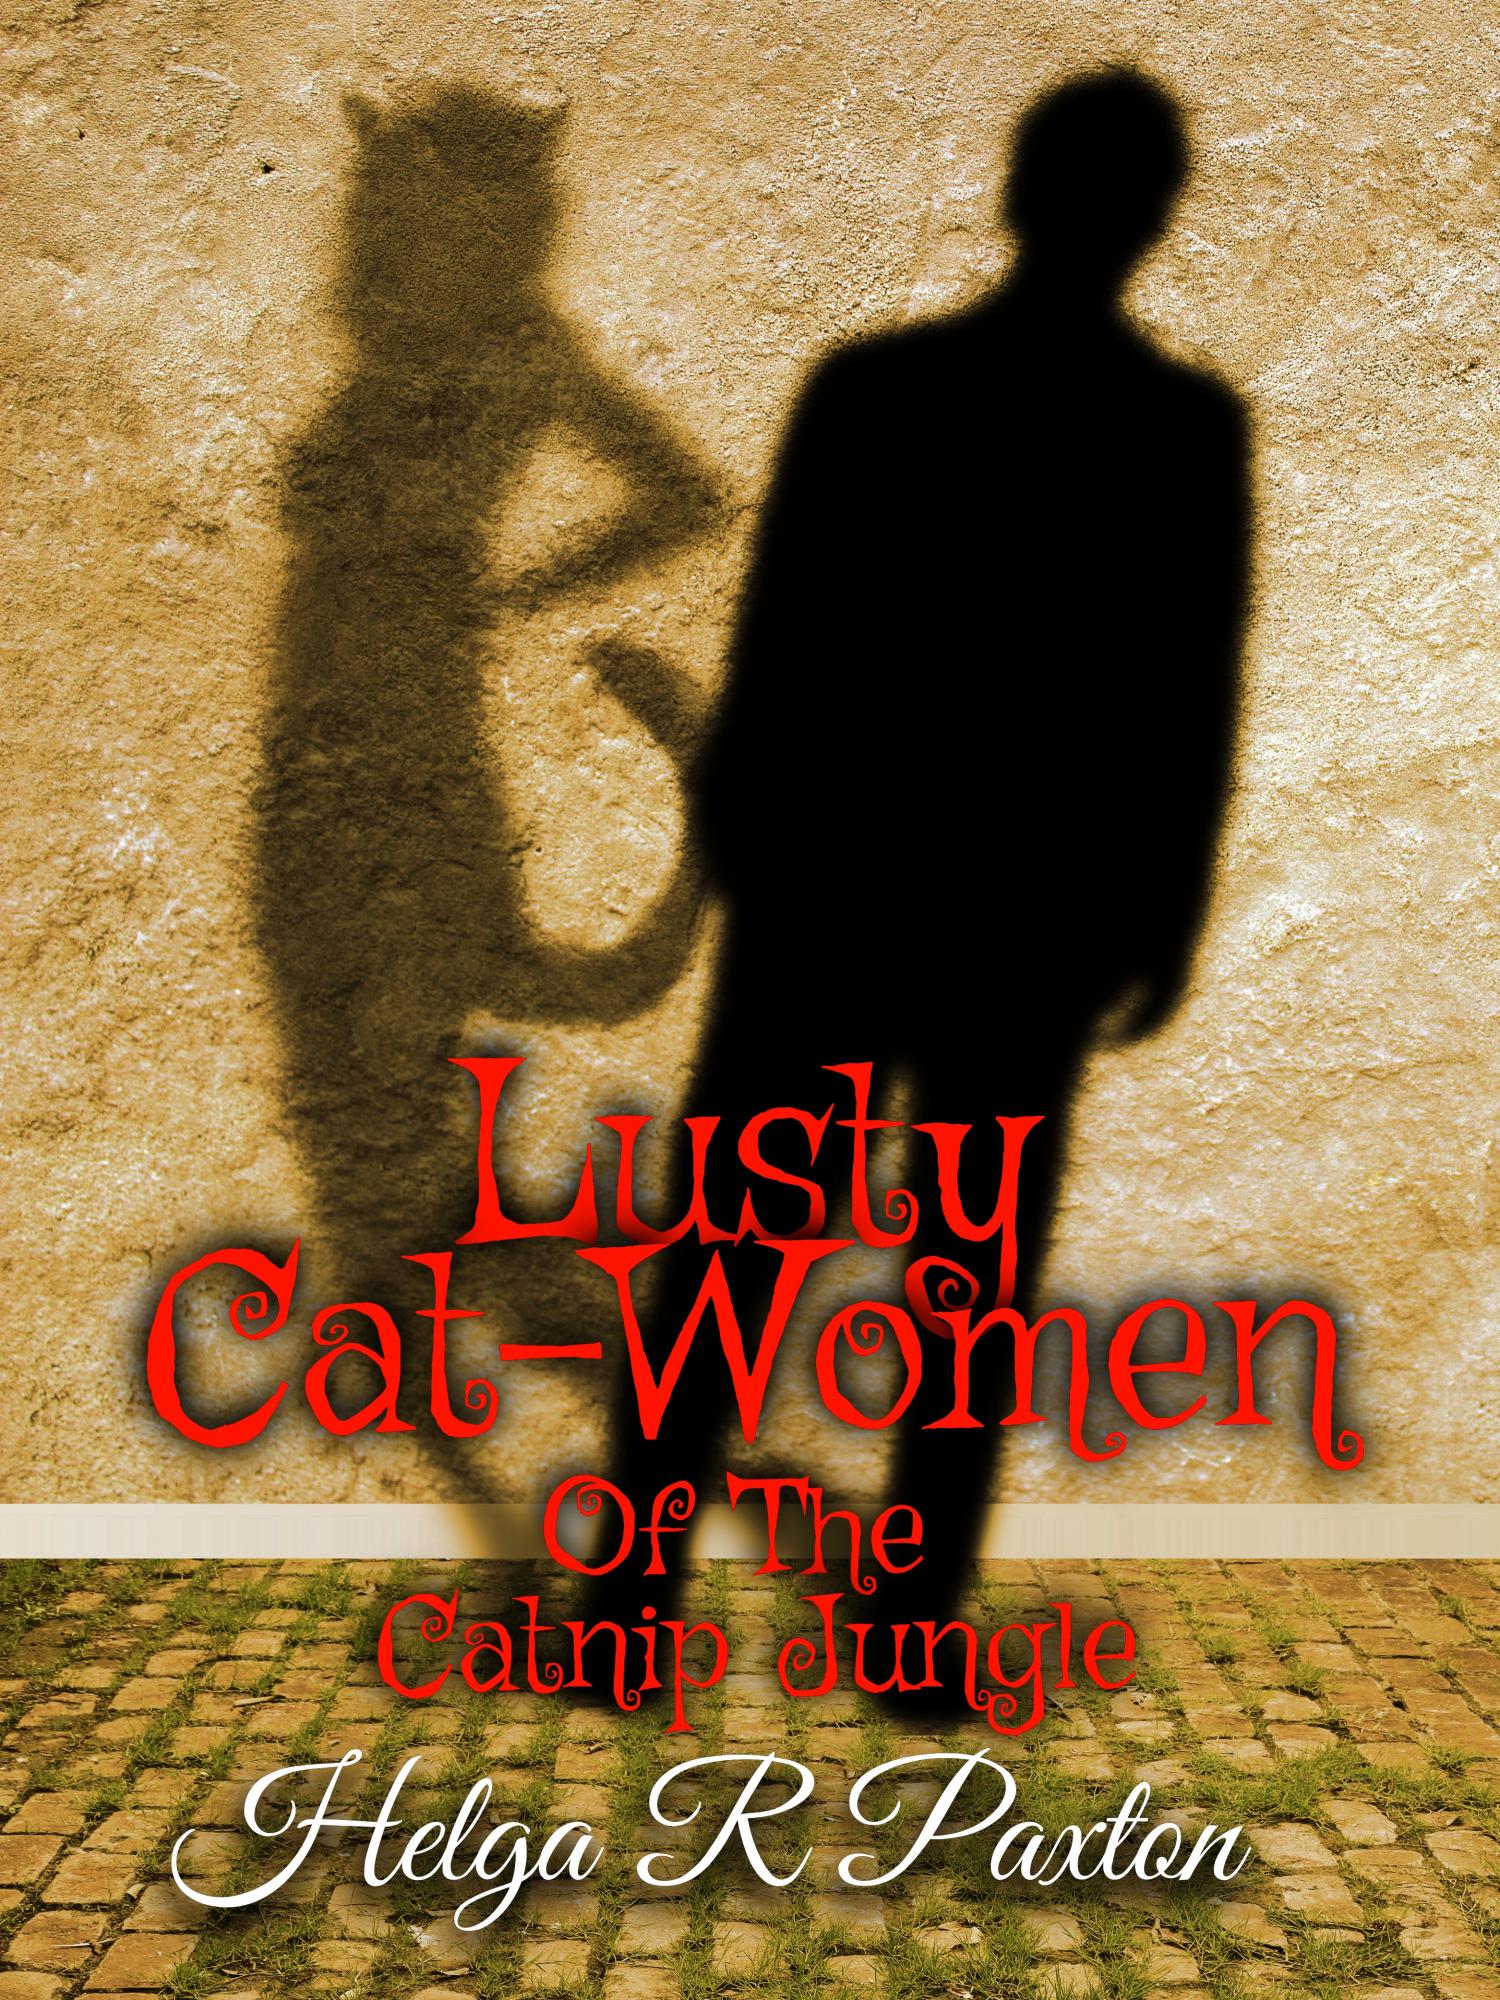 Lusty Cat-women of the Catnip Jungle by Helga R Paxton, 18-December-2018